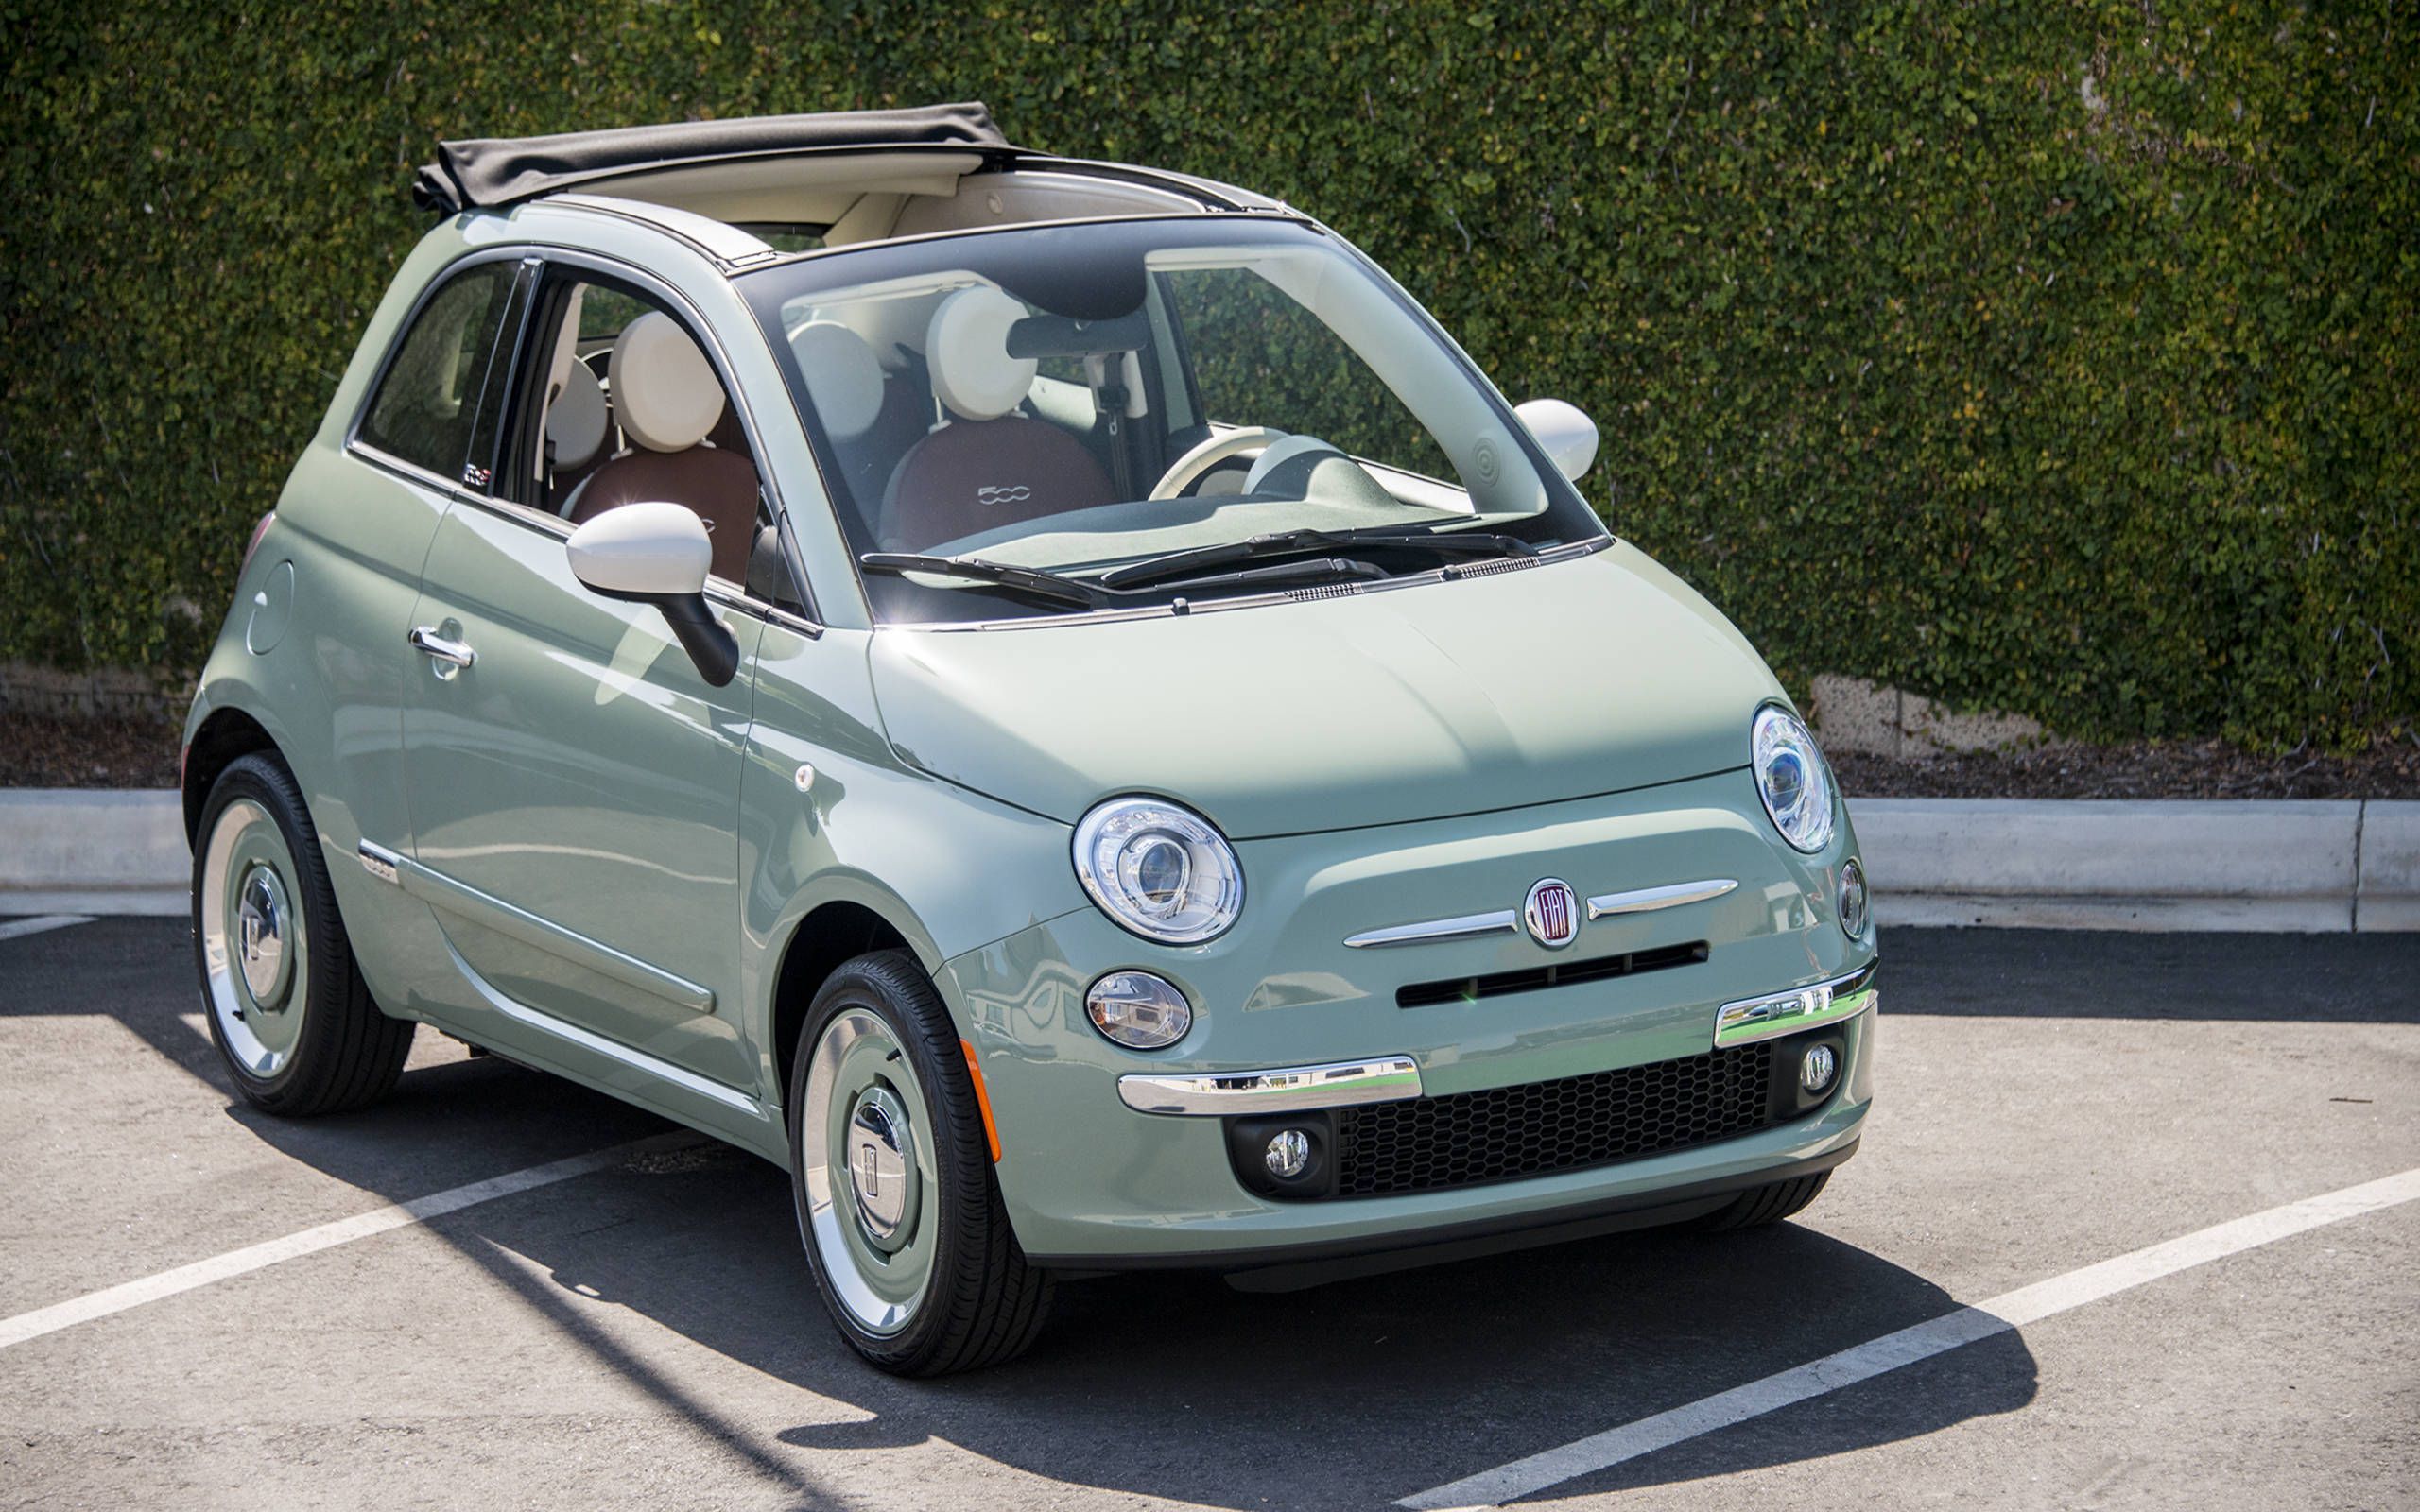 FIAT 500: Has the product become its own brand?